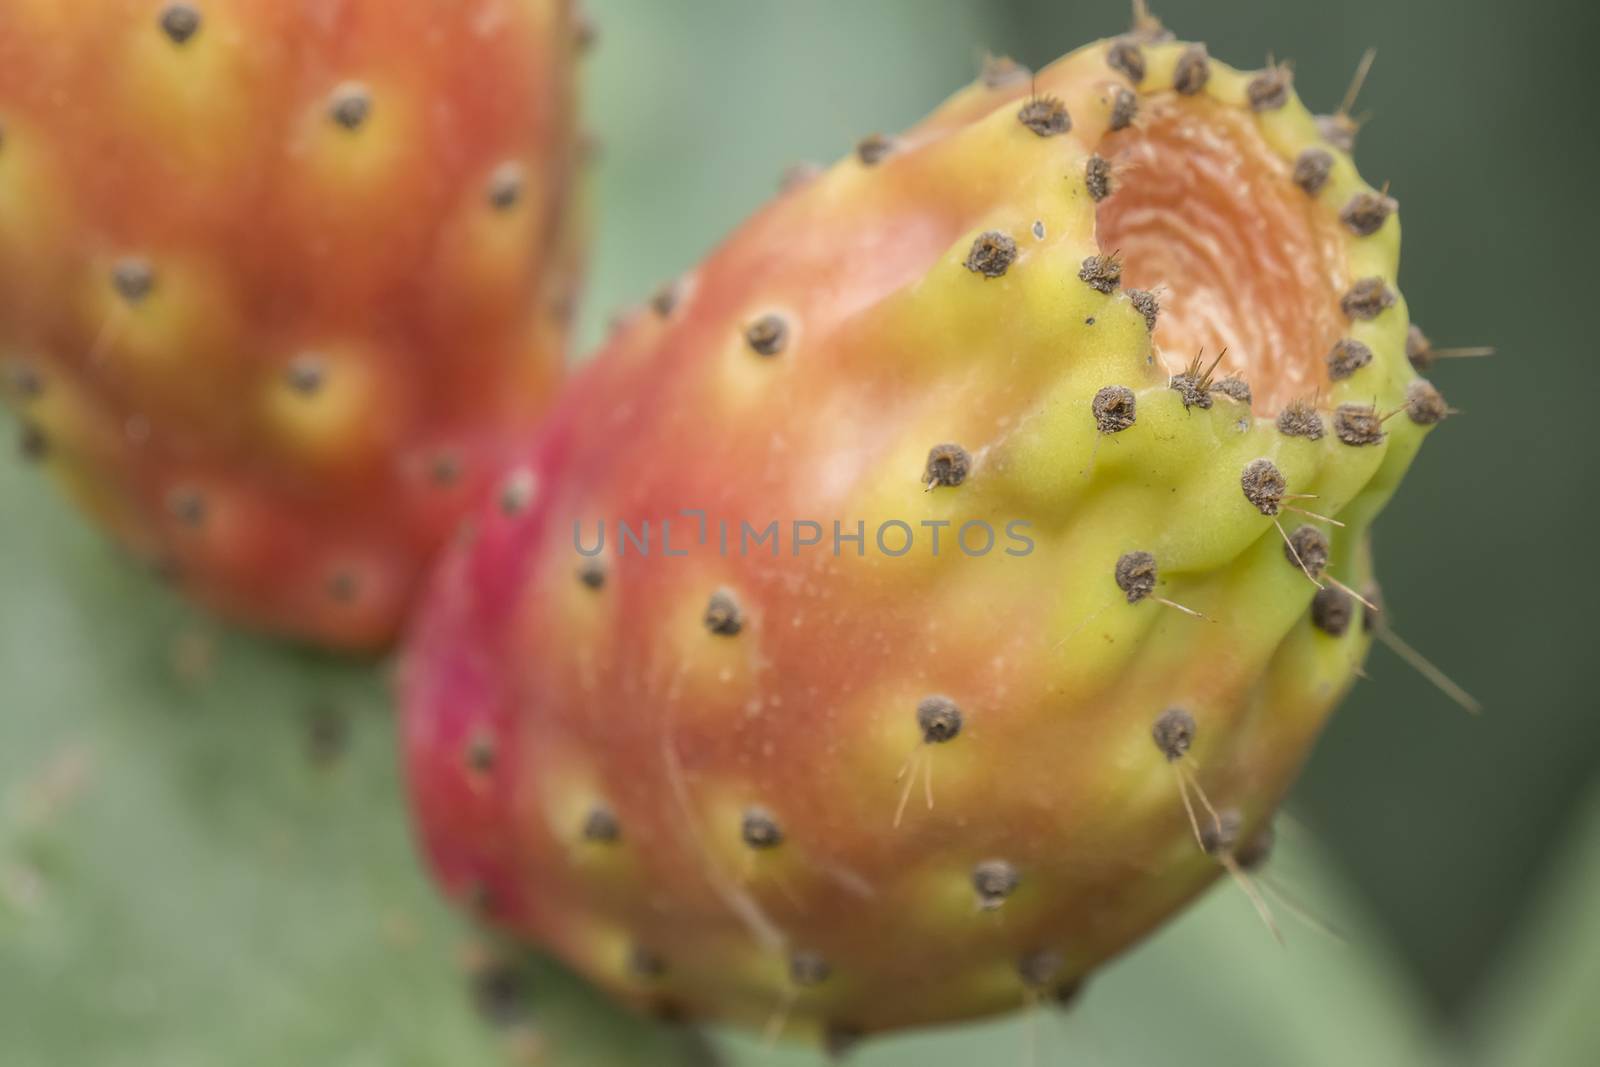 Cactaceae, Opuntia, prickly pears cactus fruitsand